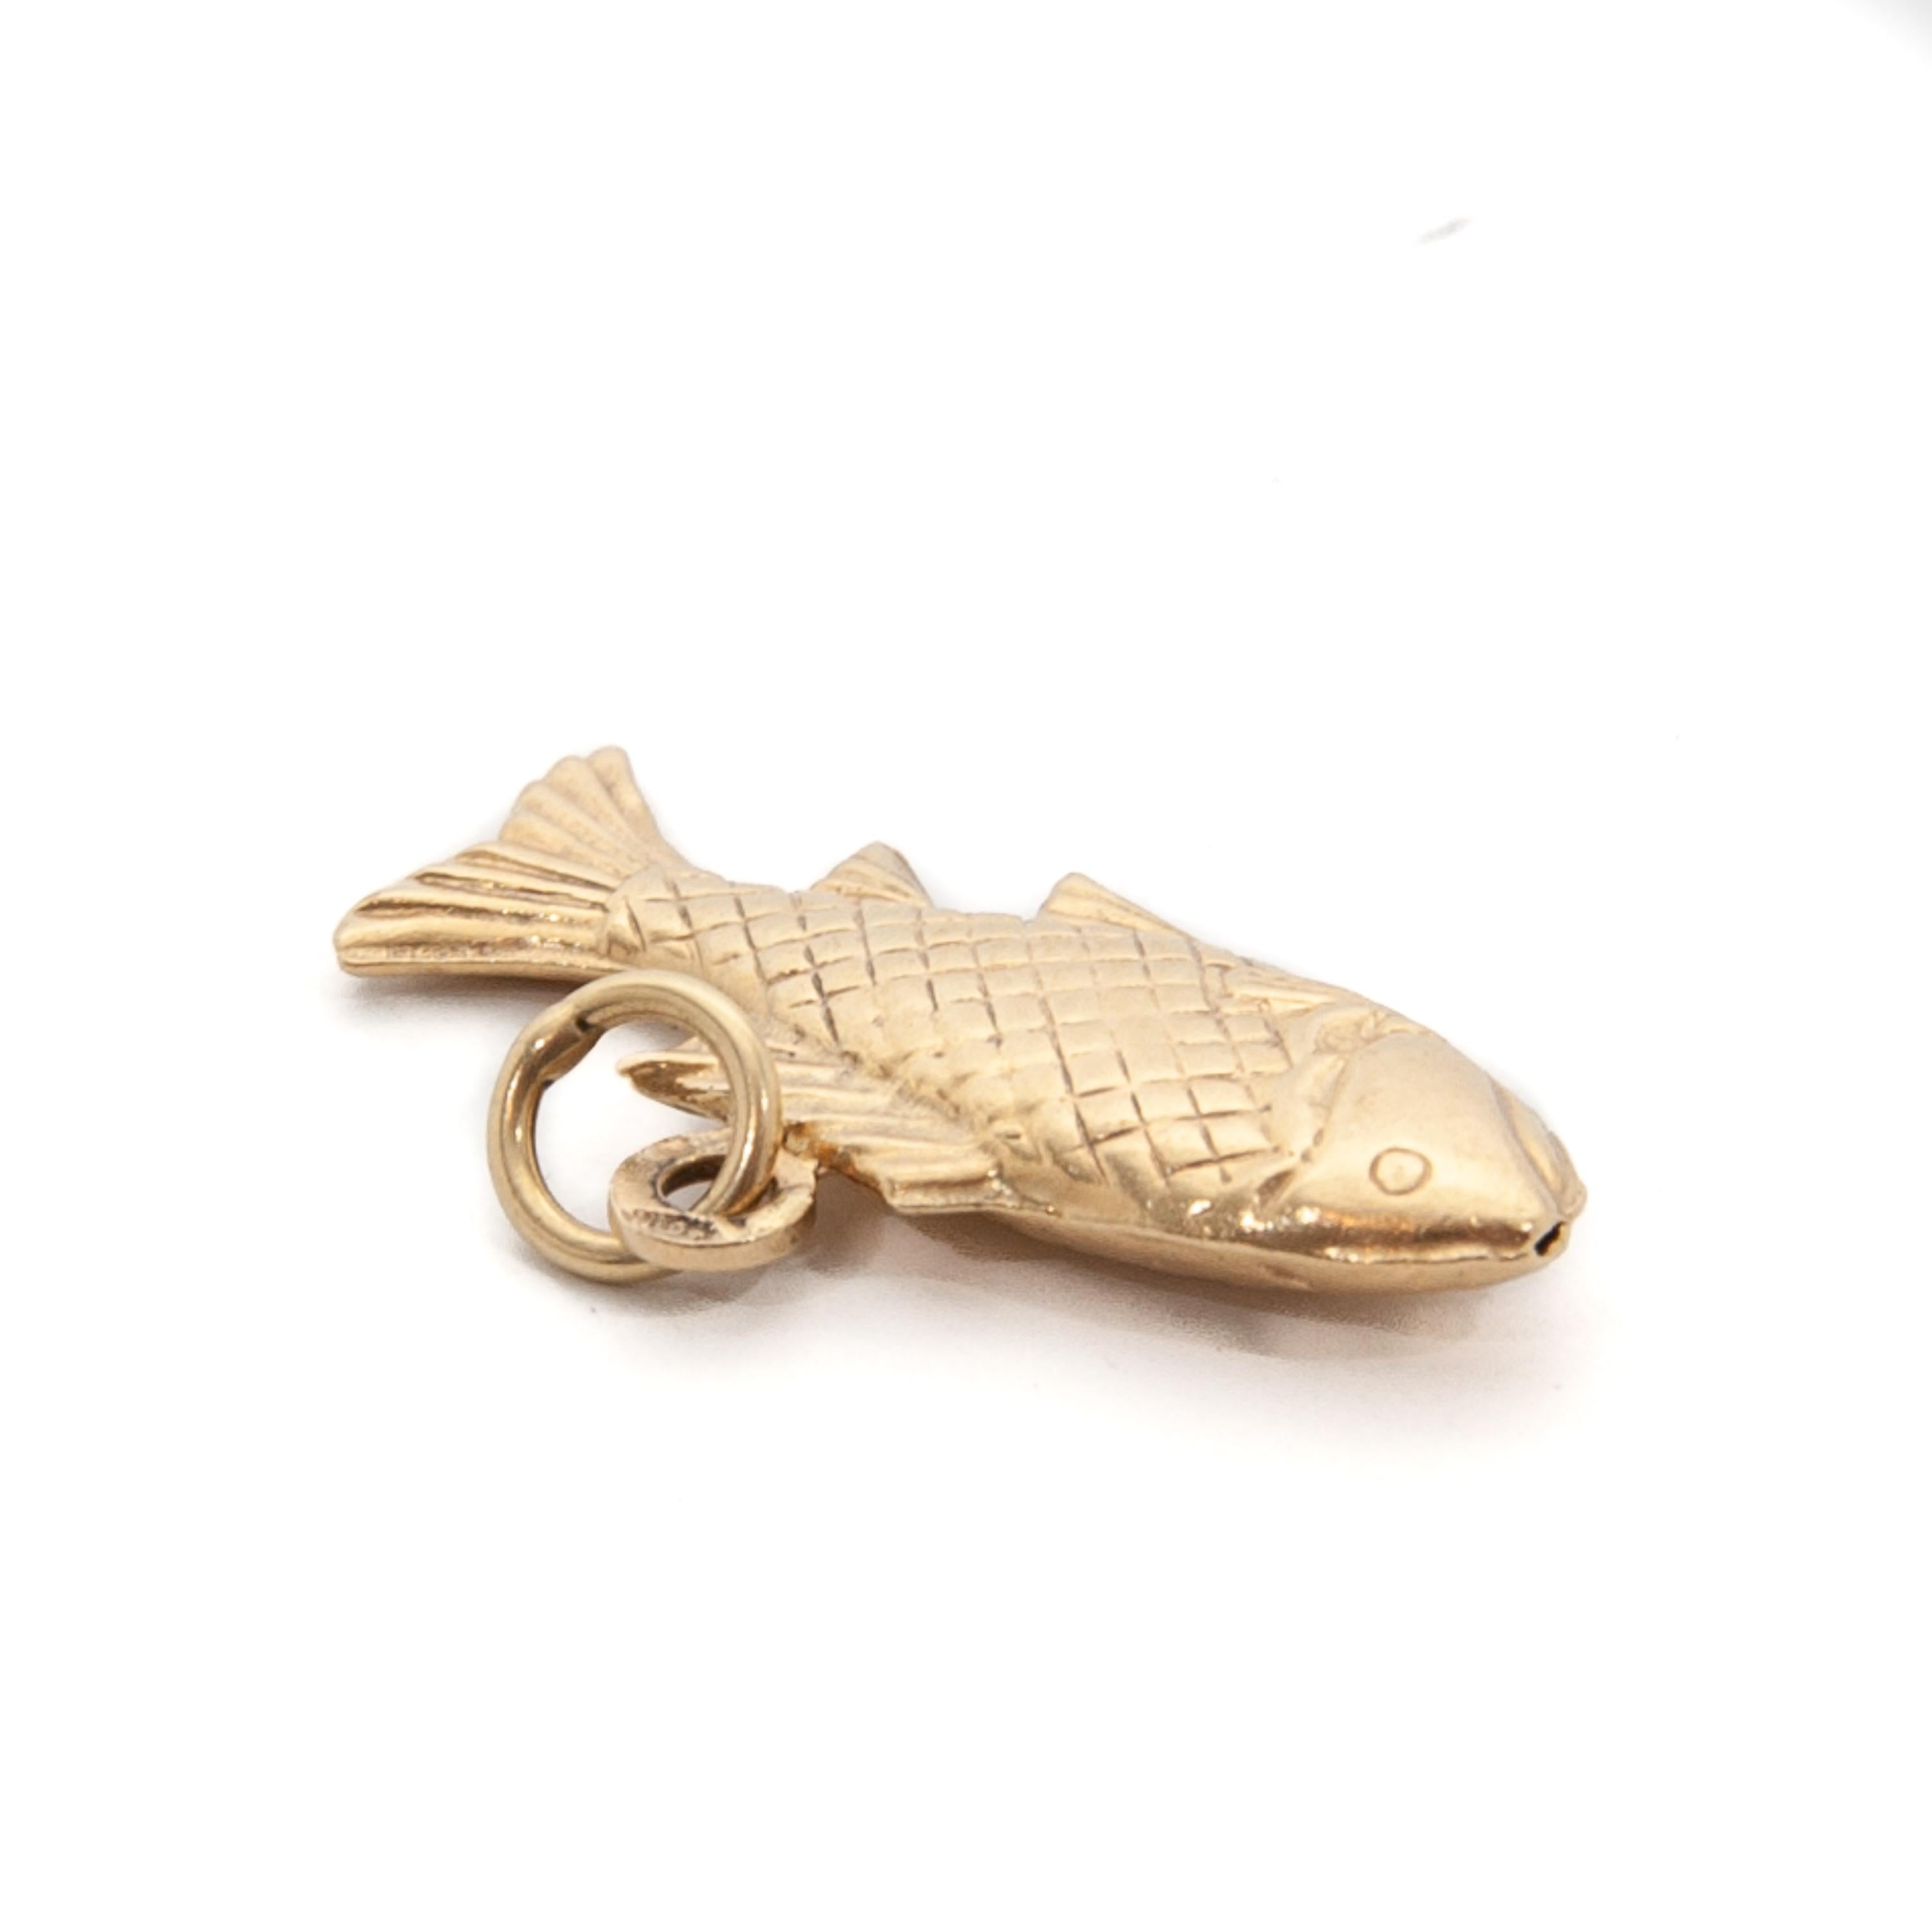 Vintage Fish Pisces Zodiac 14 Karat Gold Charm Pendant In Good Condition For Sale In Rotterdam, NL